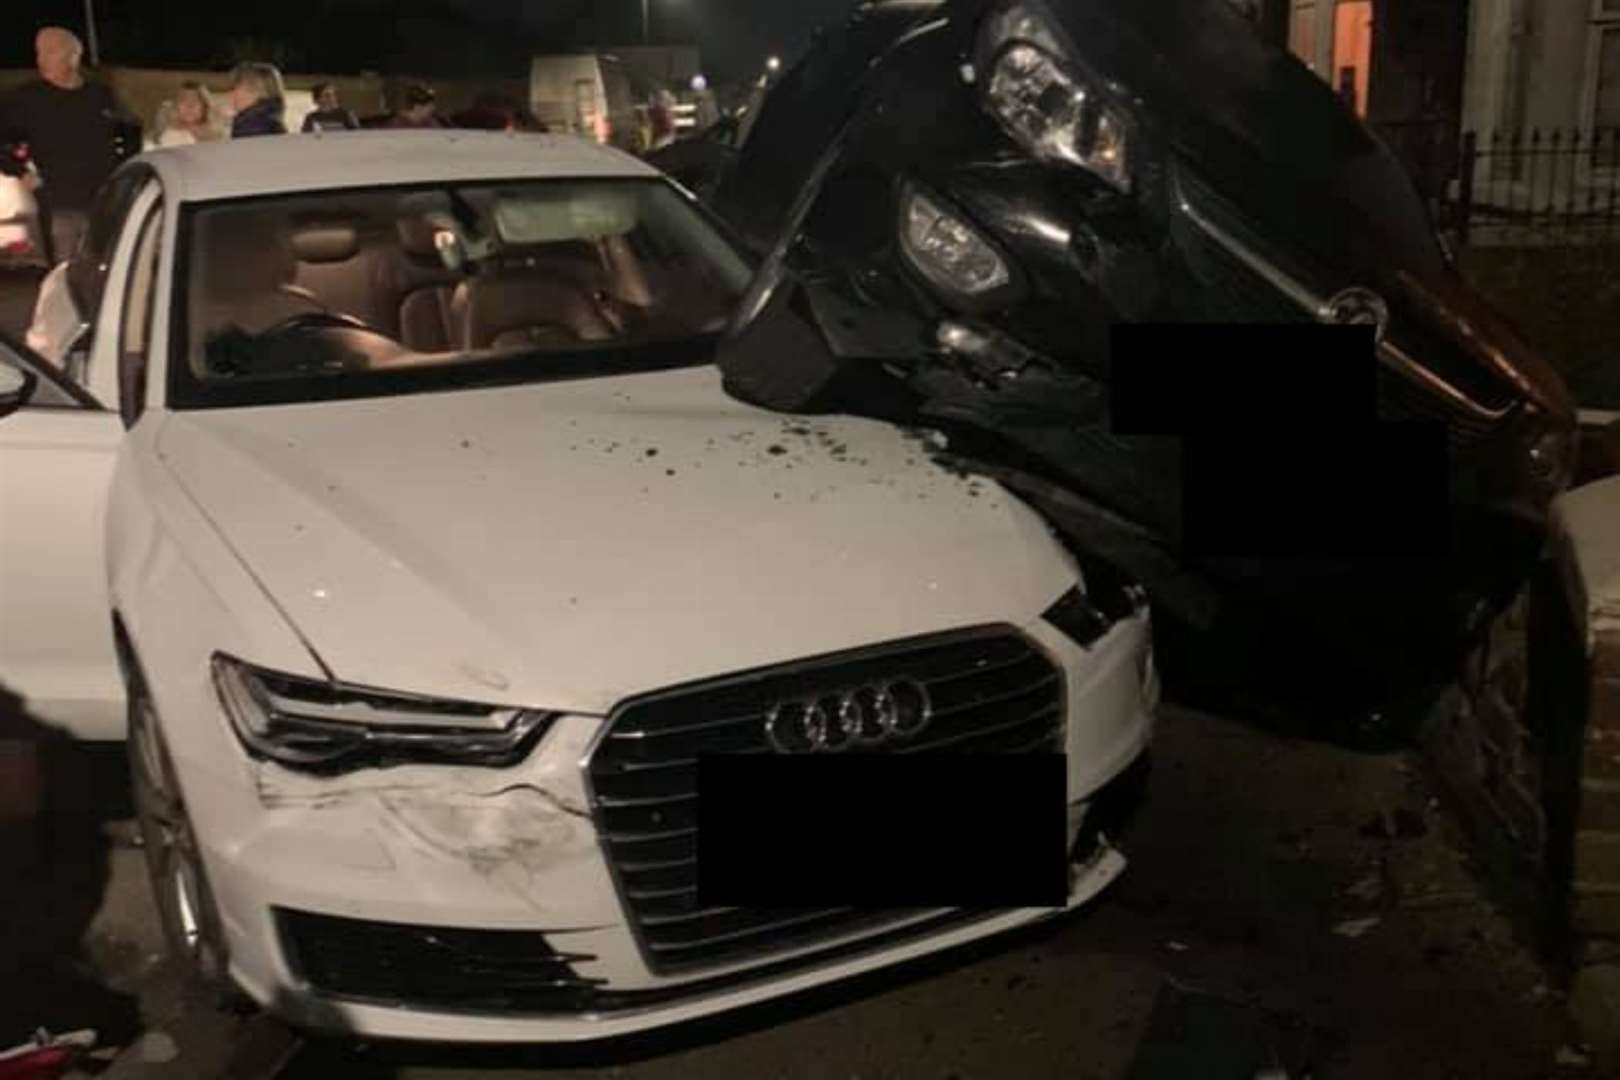 A white Audi ended up underneath another car. Photo: Marc Malki